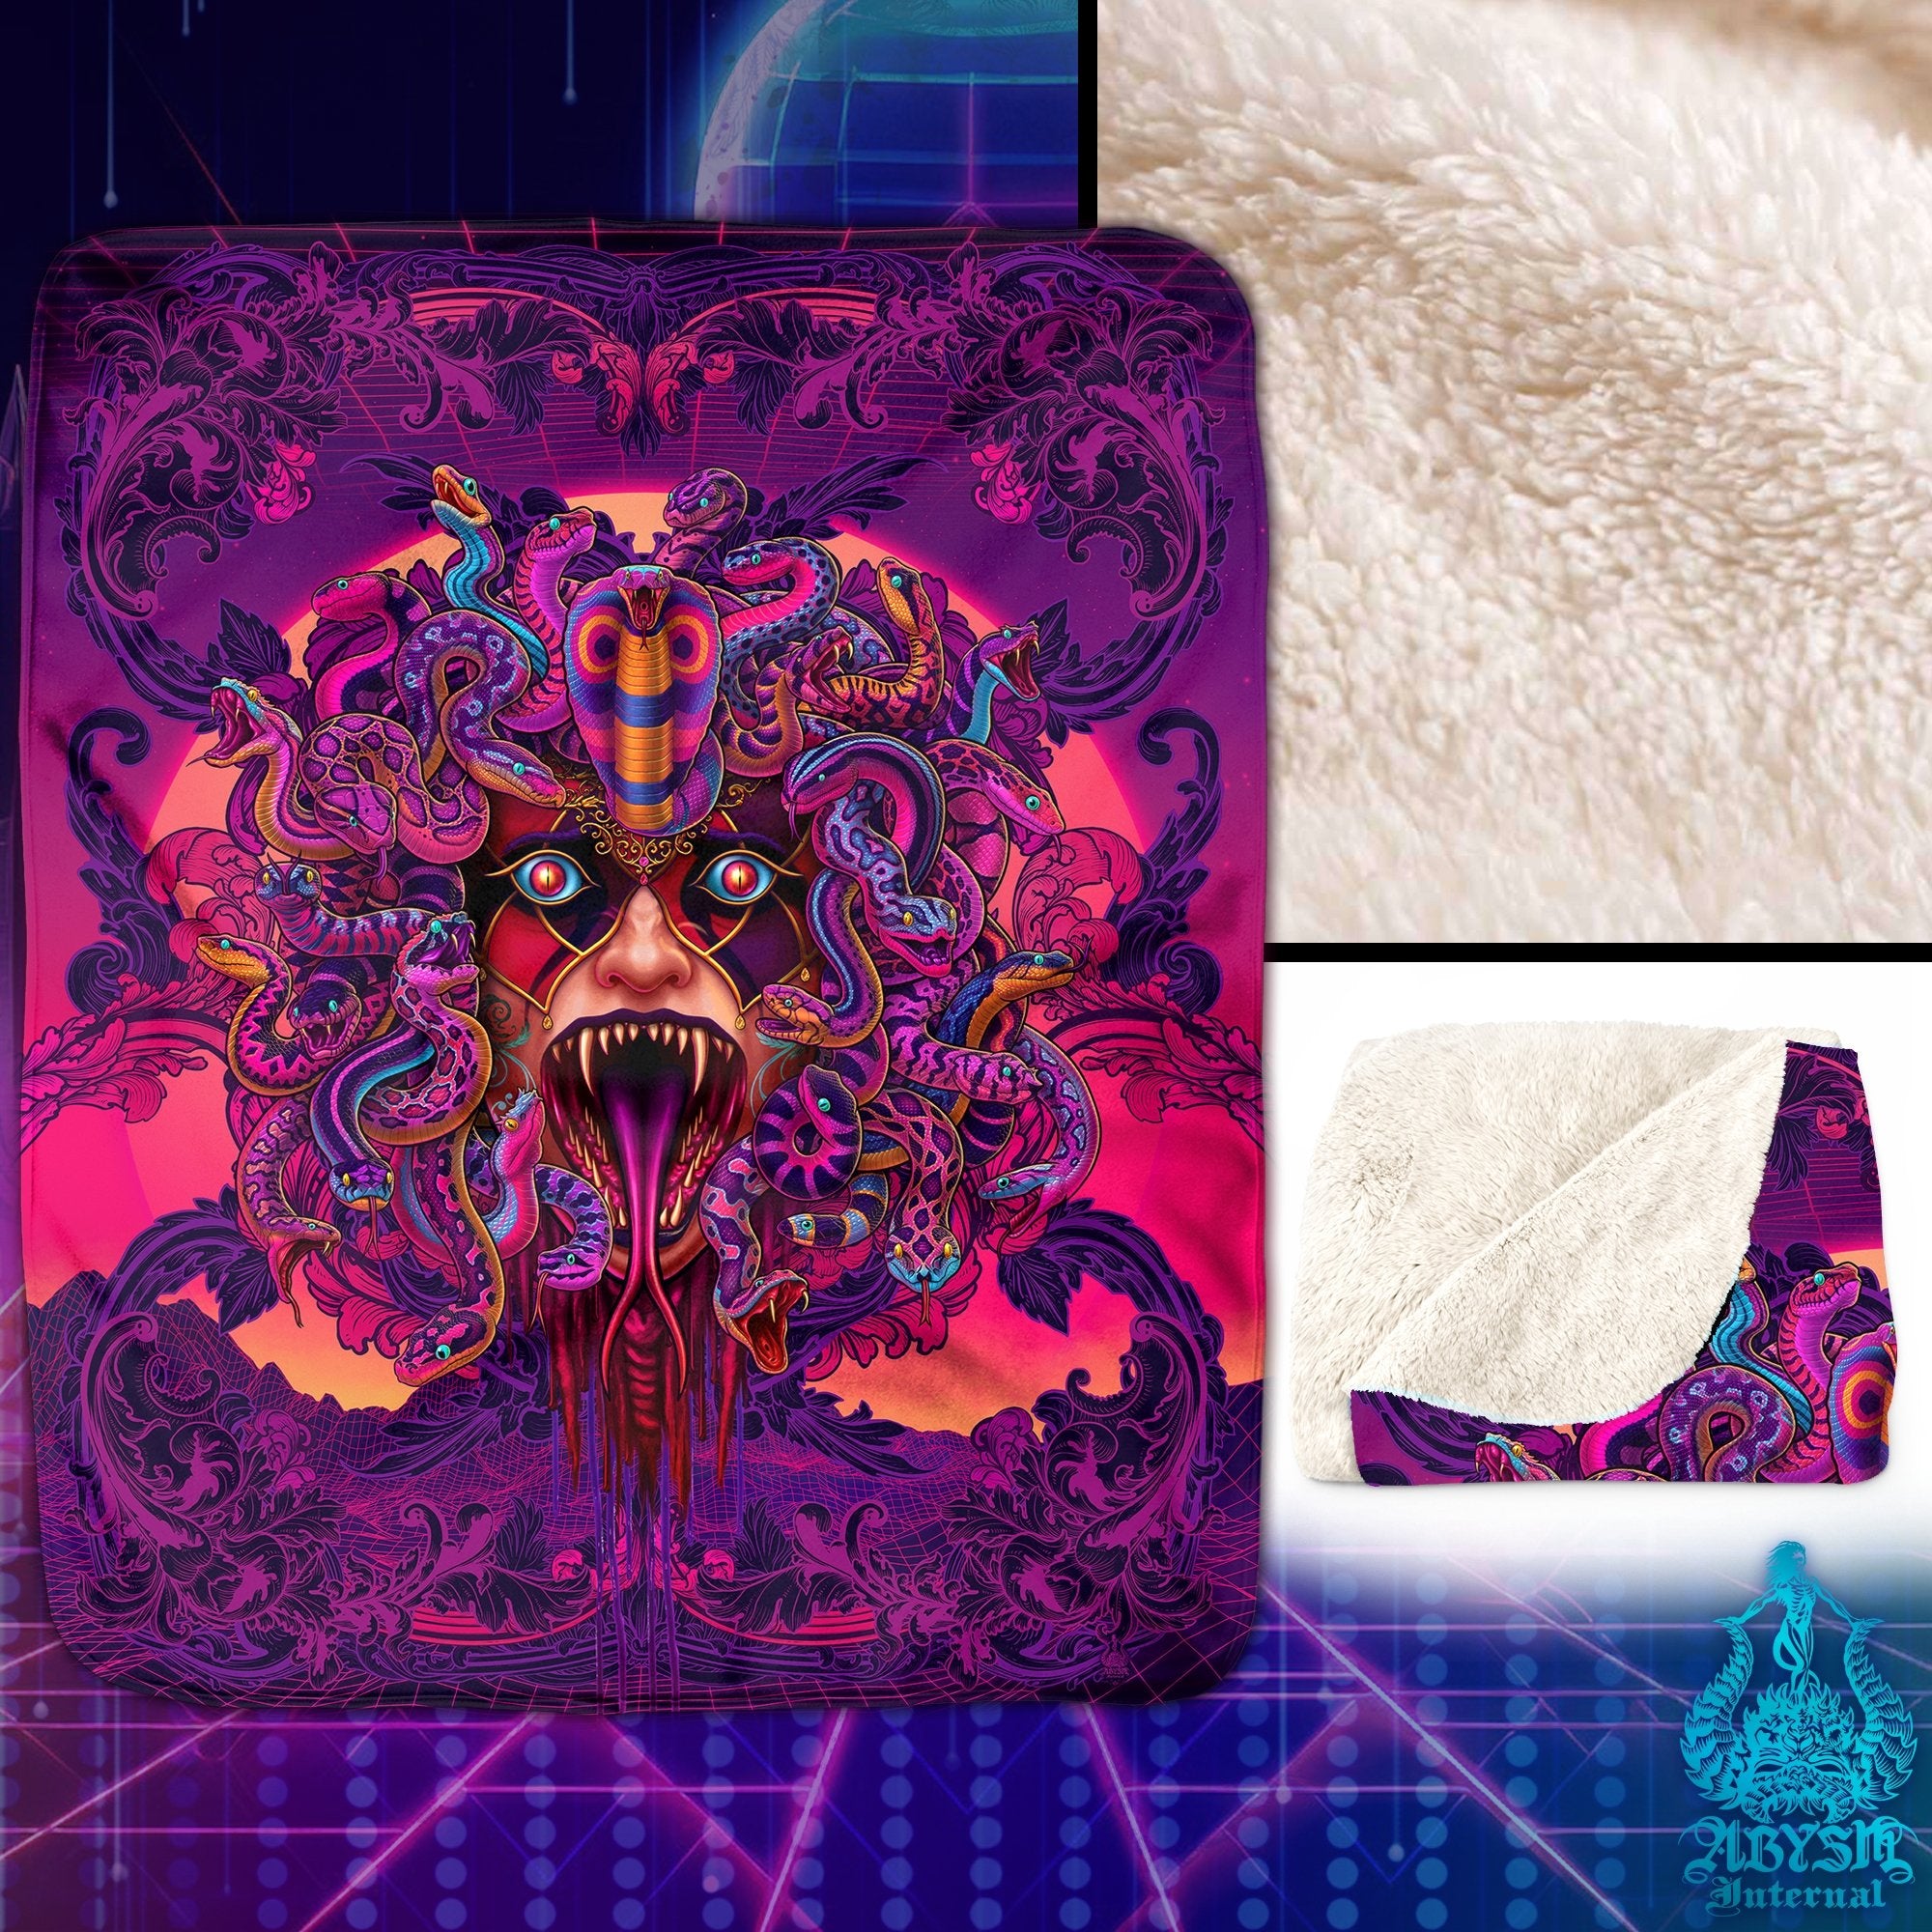 Psychedelic Throw Fleece Blanket, Synthwave Art, Vaporwave Home Decor, 80s Retrowave, Eclectic and Funky Gift for Kids - Medusa Scream - Abysm Internal